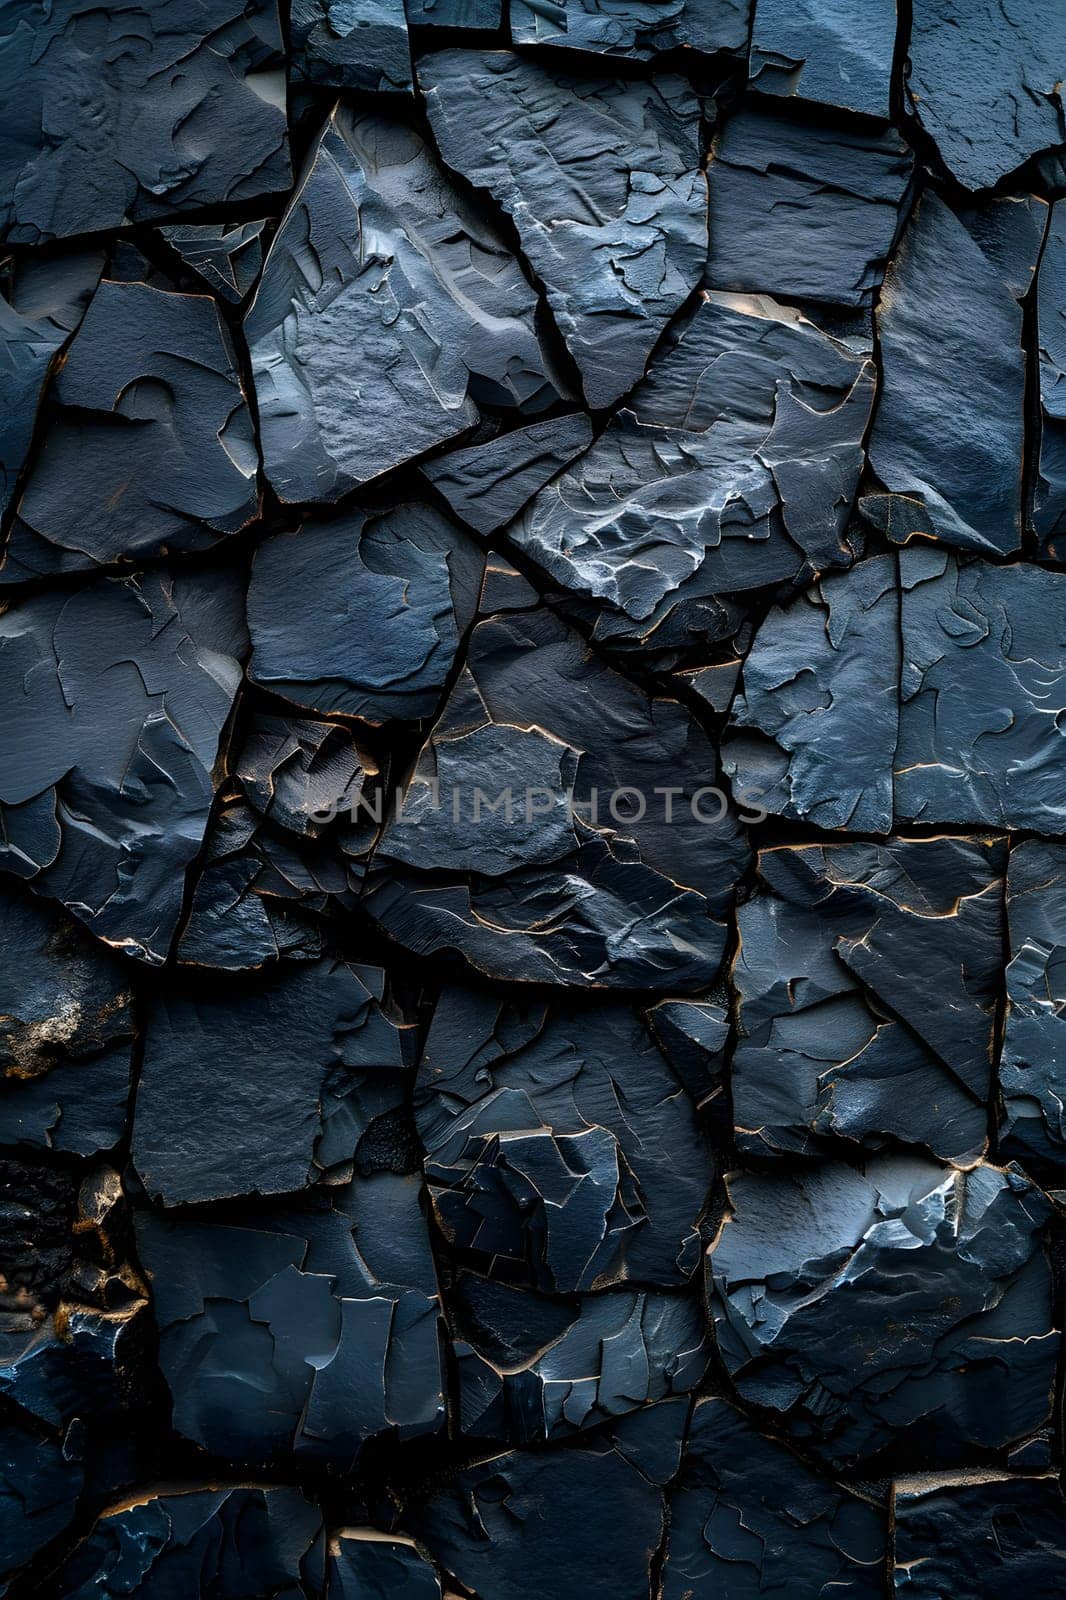 A close up of a composite material rock wall in electric blue and grey pattern, resembling cobblestone. This building material is reminiscent of a road surface, with a bedrocklike texture